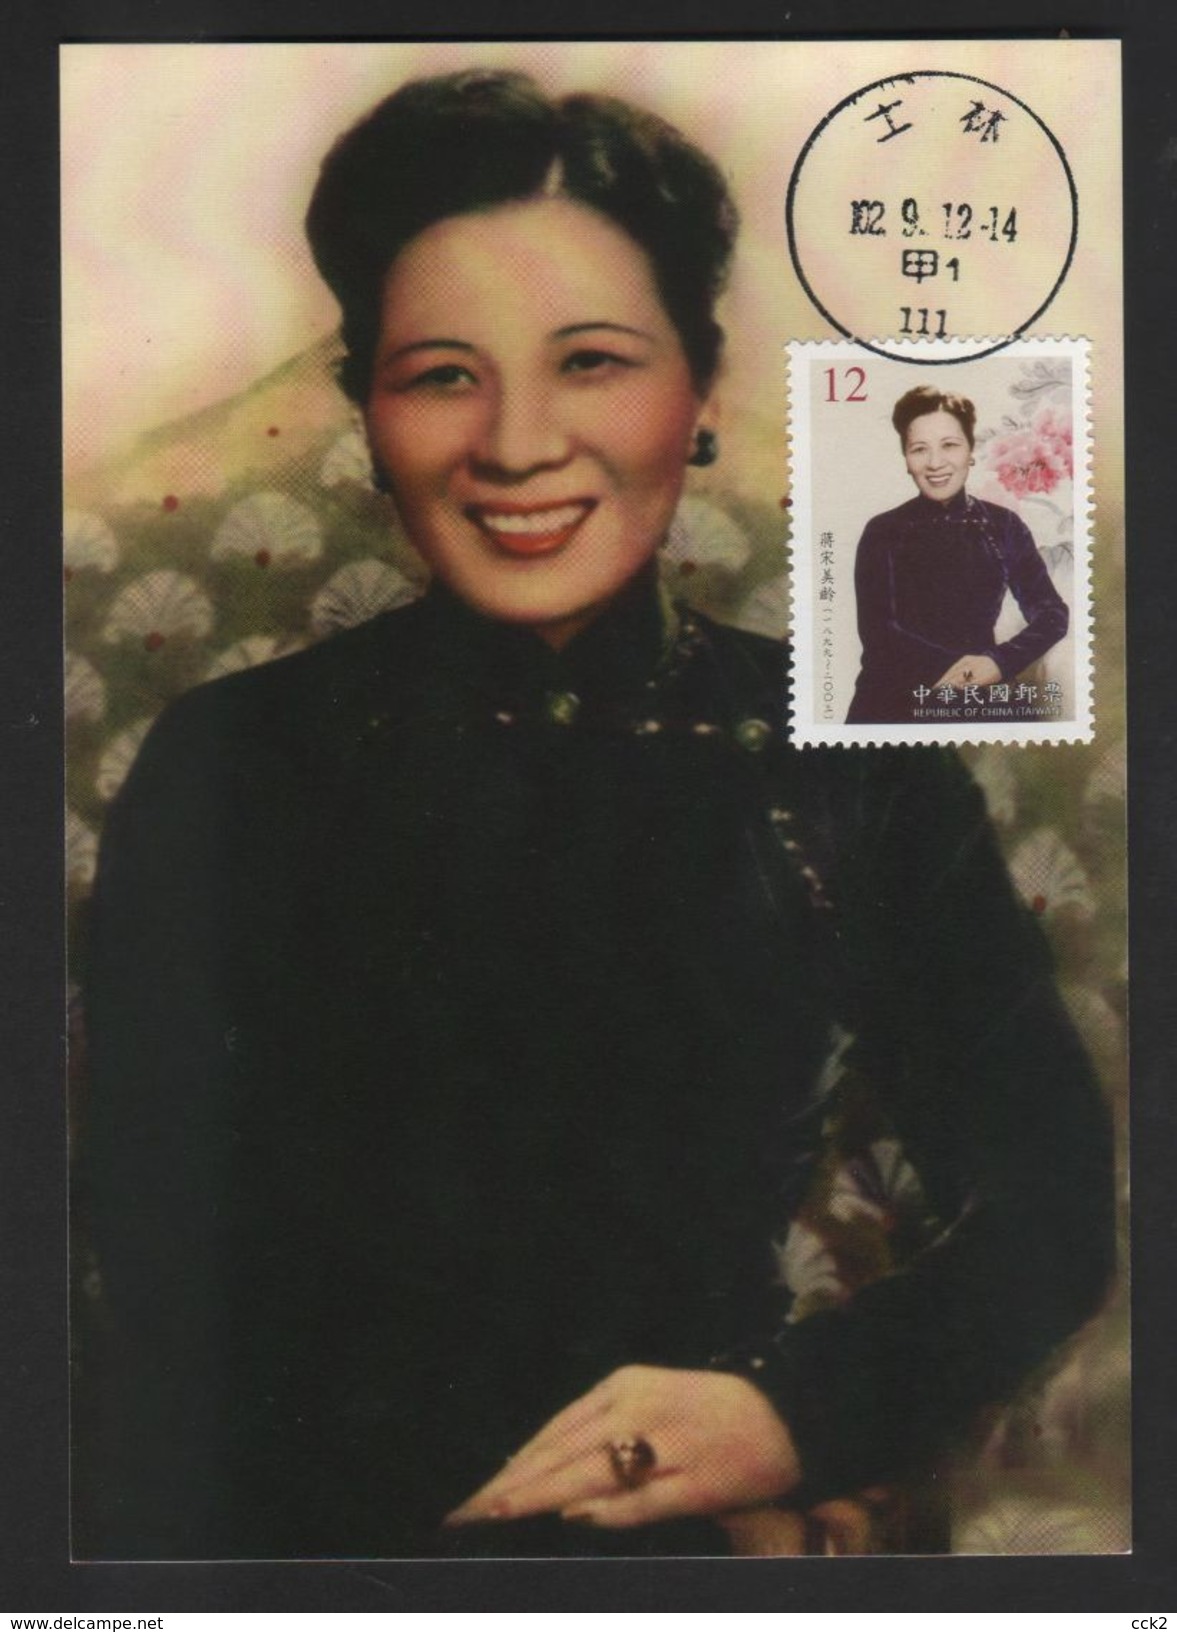 2013 Taiwan R.O.China- Maximum Card Chiang Soong Mayling Portrait Postage Stamp - Donne Celebri